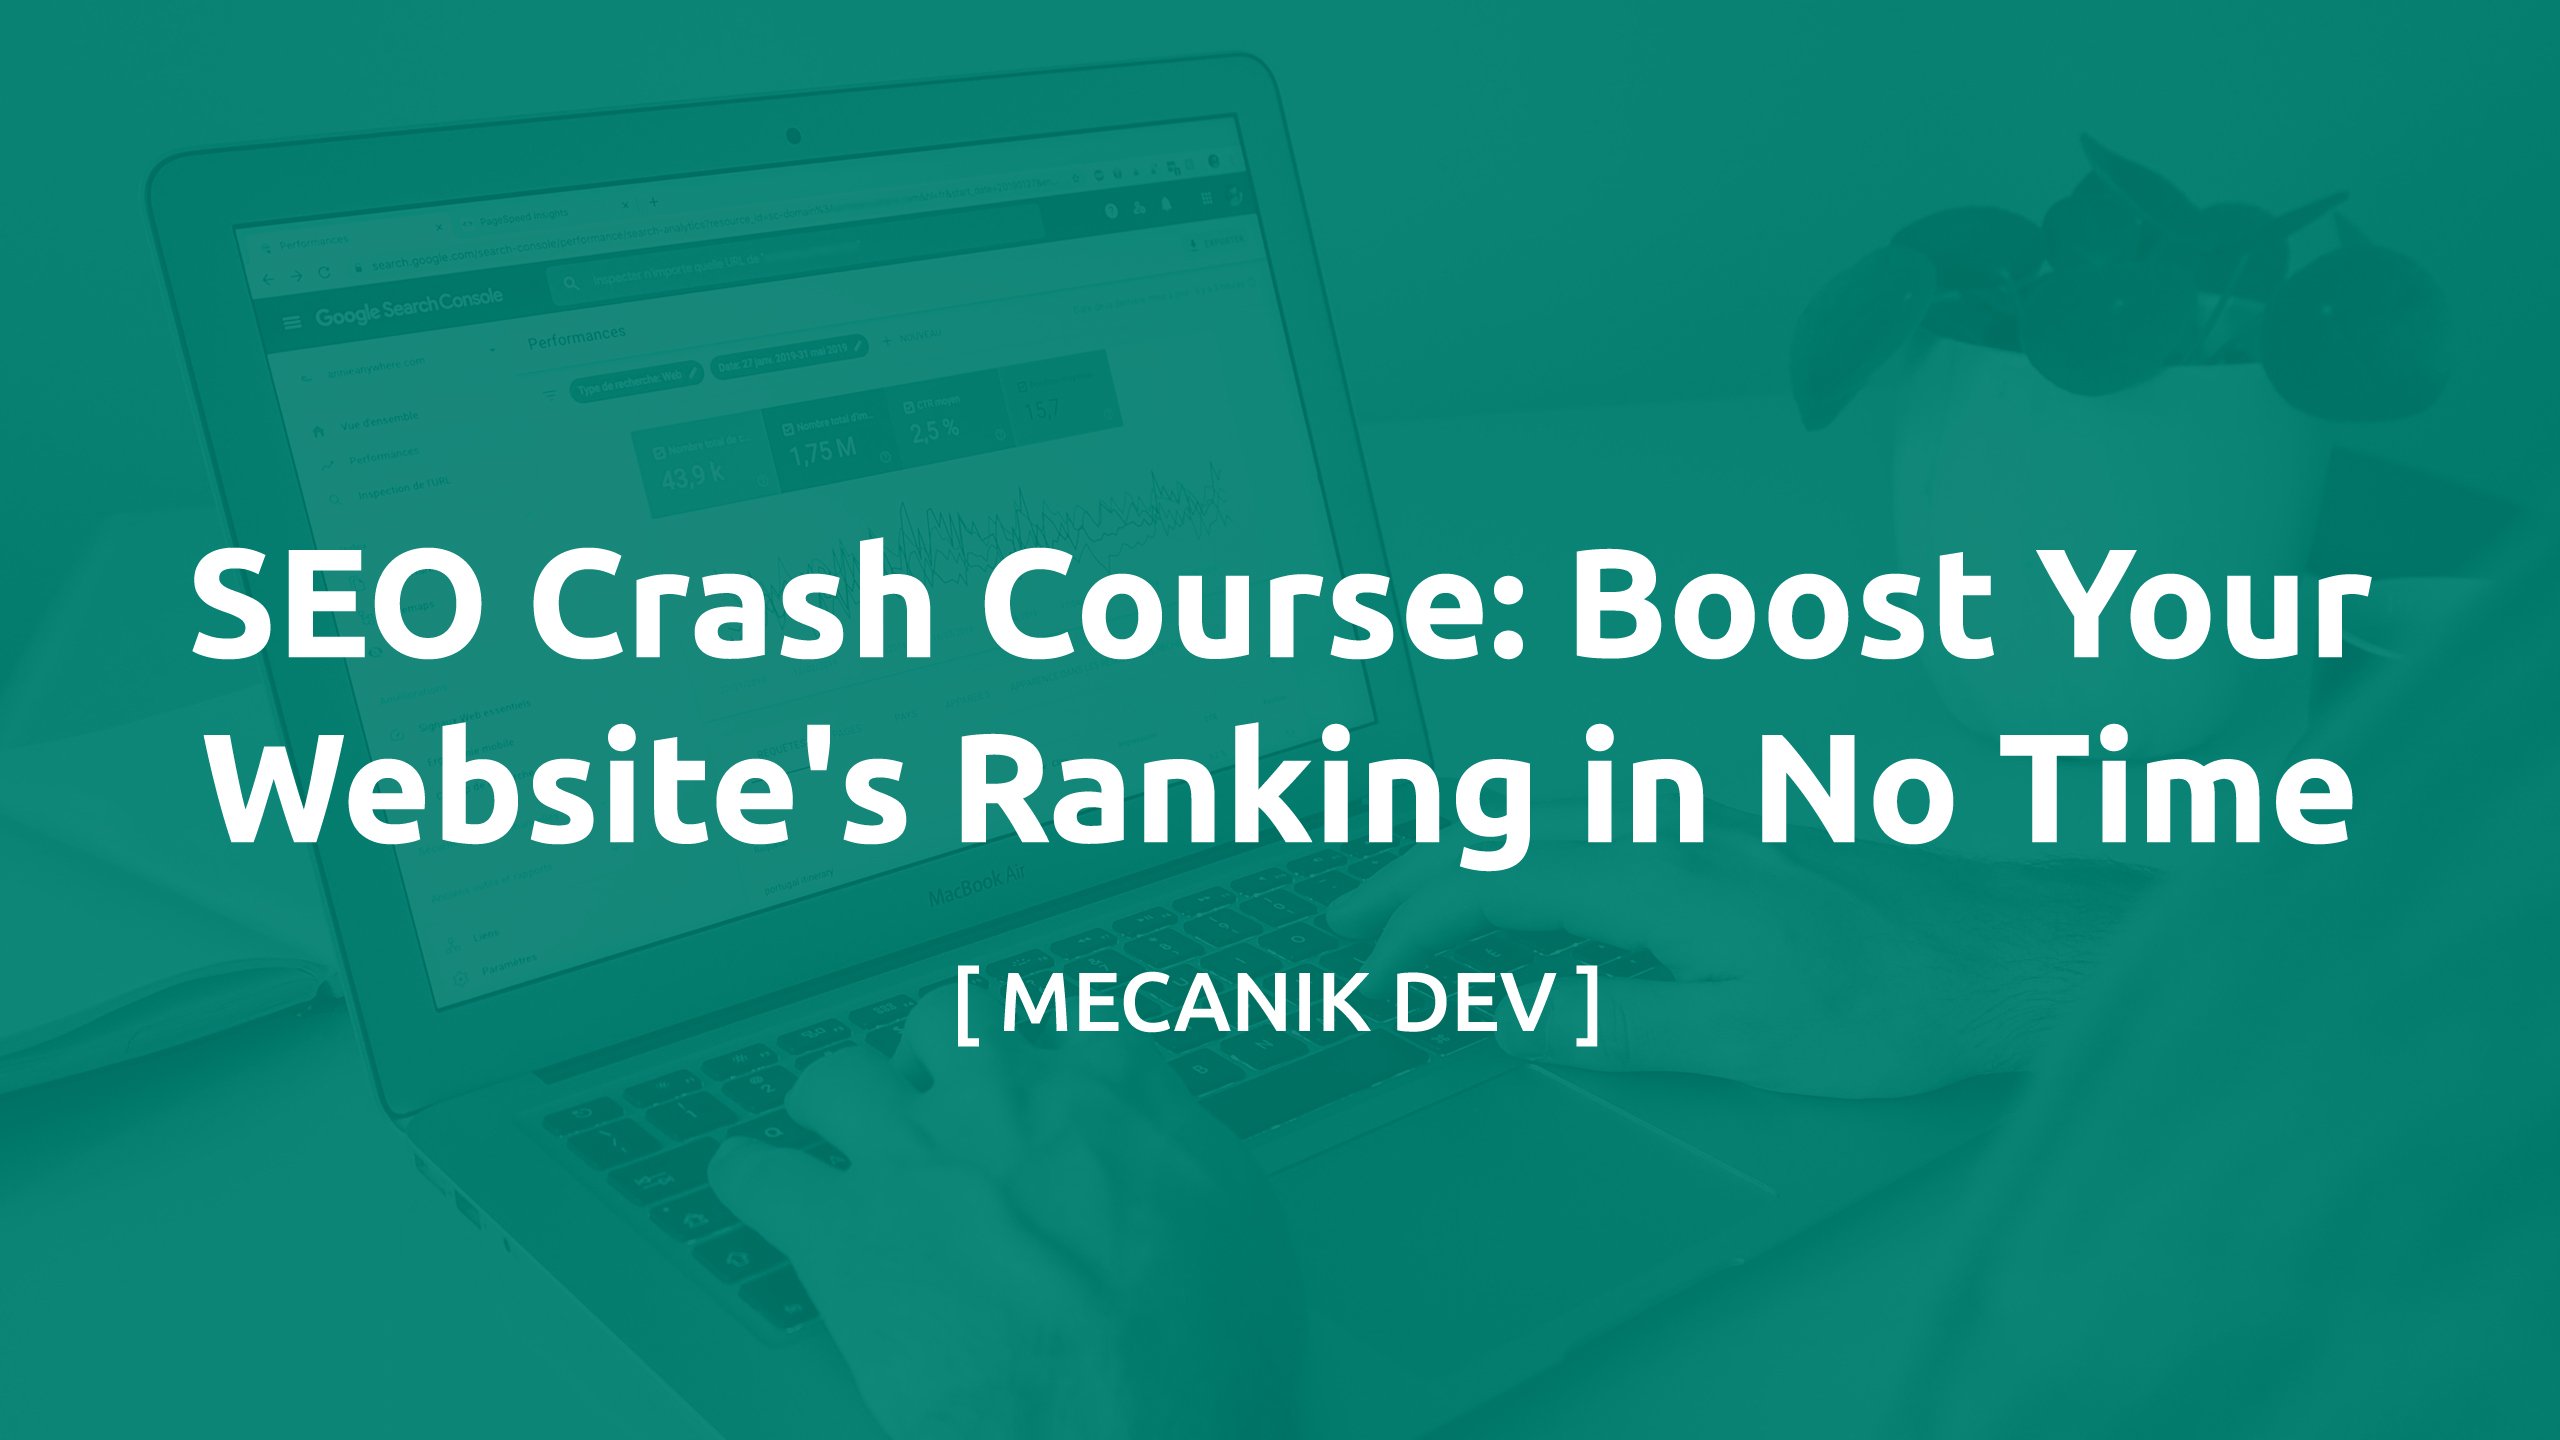 SEO Crash Course: Boost Rankings and Drive Traffic Fast